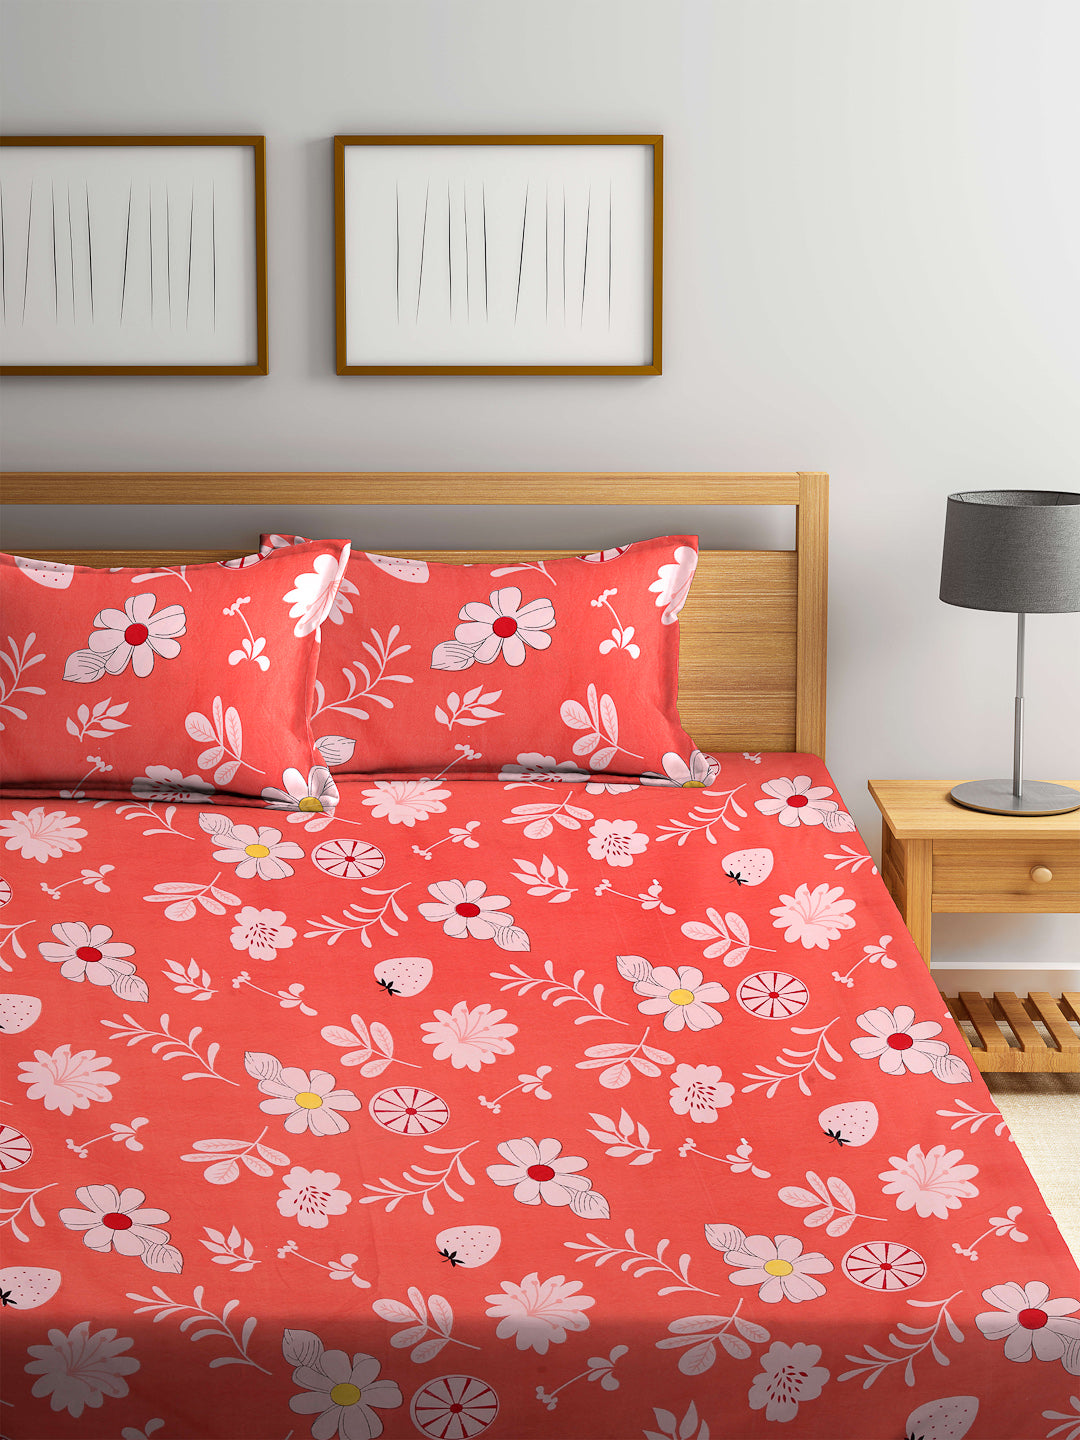 Arrabi Orange Floral TC Cotton Blend Double Size Fitted Bedsheet with 2 Pillow Cover ( 250 x 225 cm)